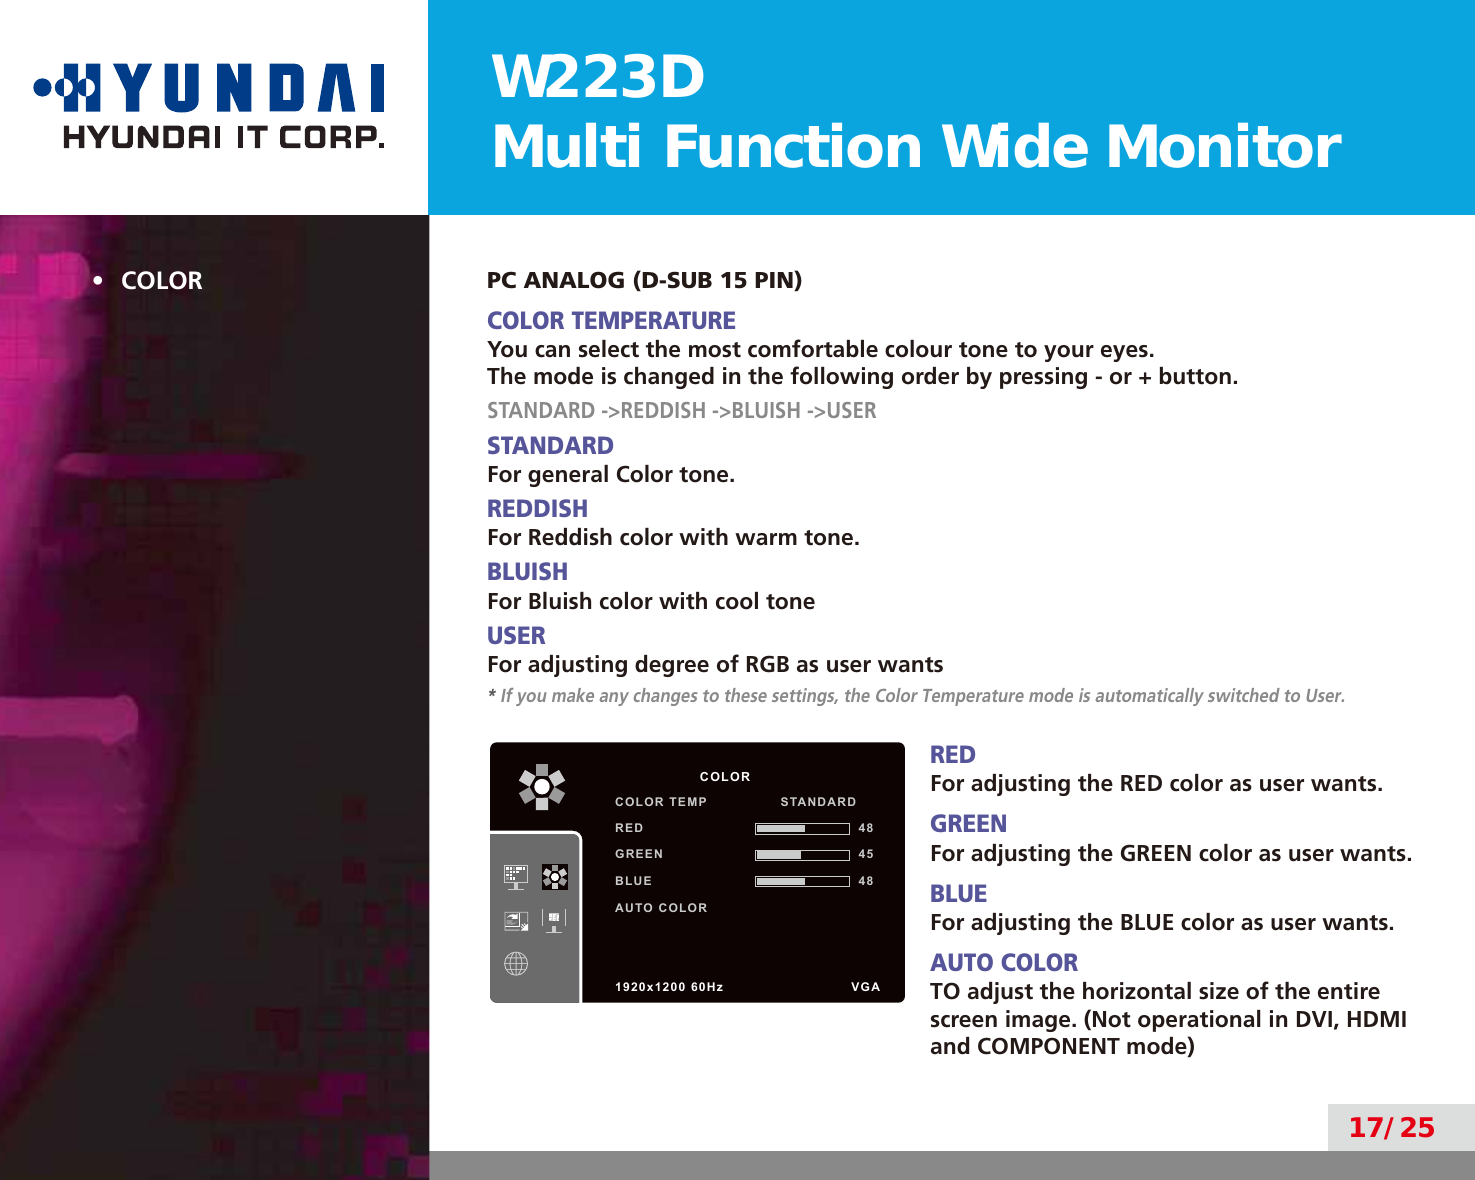 W223DMulti Function Wide Monitor17/25•  COLOR PC ANALOG (D-SUB 15 PIN)COLOR TEMPERATUREYou can select the most comfortable colour tone to your eyes.The mode is changed in the following order by pressing - or + button.STANDARD -&gt;REDDISH -&gt;BLUISH -&gt;USERSTANDARDFor general Color tone.REDDISHFor Reddish color with warm tone.BLUISHFor Bluish color with cool toneUSERFor adjusting degree of RGB as user wants* If you make any changes to these settings, the Color Temperature mode is automatically switched to User.REDFor adjusting the RED color as user wants.GREENFor adjusting the GREEN color as user wants.BLUEFor adjusting the BLUE color as user wants.AUTO COLORTO adjust the horizontal size of the entire screen image. (Not operational in DVI, HDMI and COMPONENT mode)          COLORCOLOR TEMP                STANDARDRED 48GREEN 45BLUE 48AUTO COLOR1920x1200 60Hz               VGA